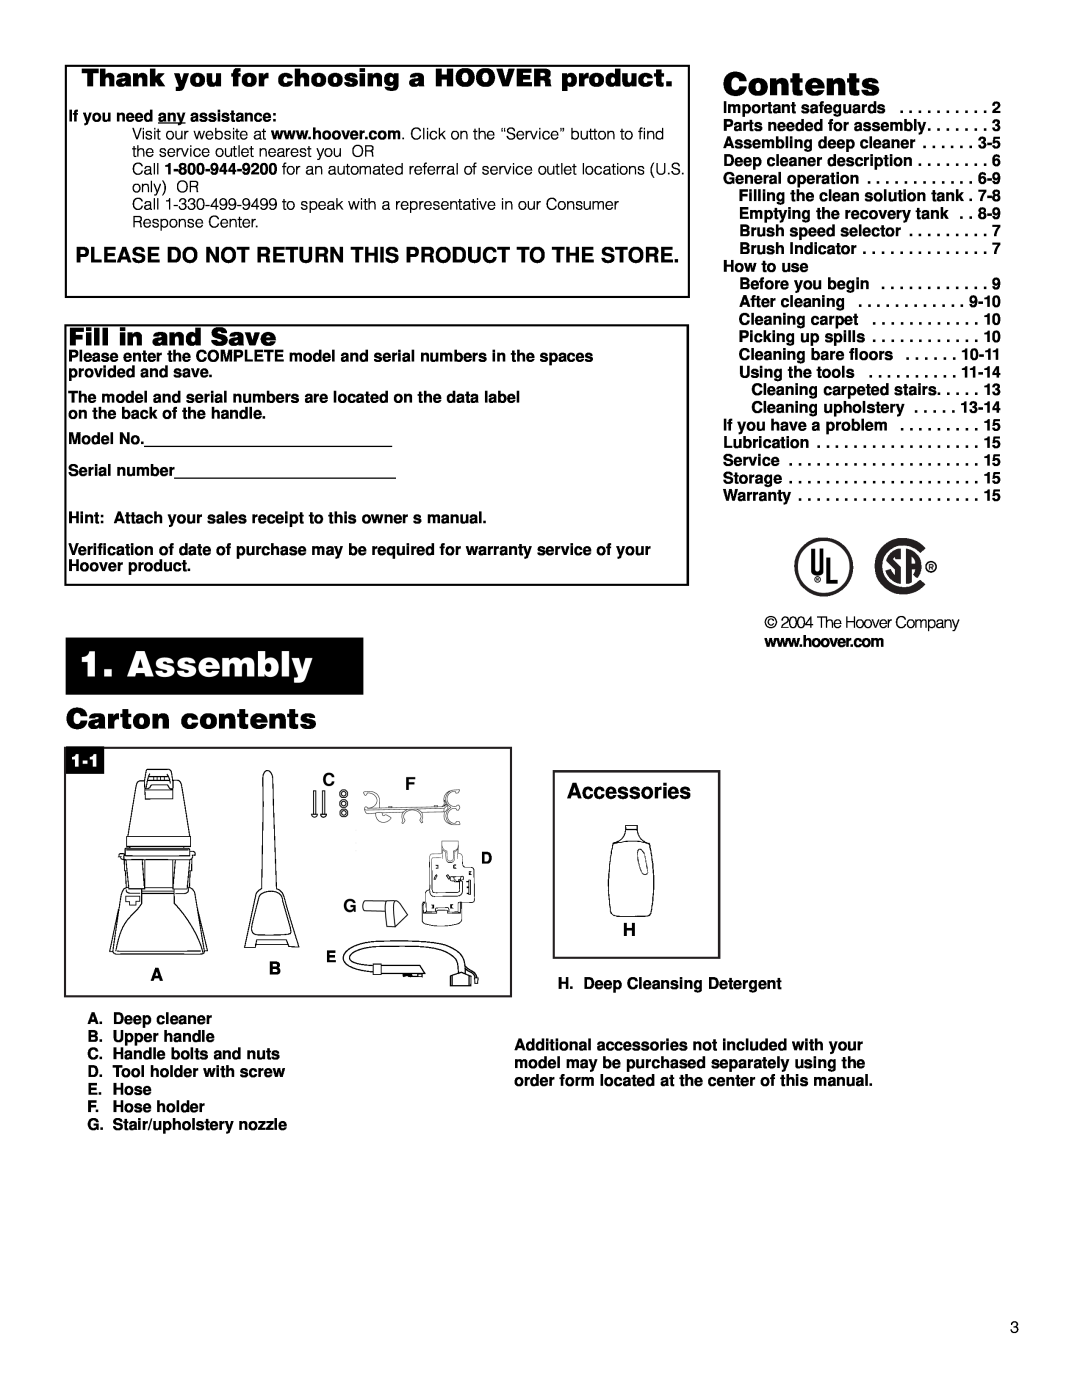 Hoover F5906900 owner manual Contents, Carton contents, Thank you for choosing a HOOVER product, Fill in and Save, Assembly 